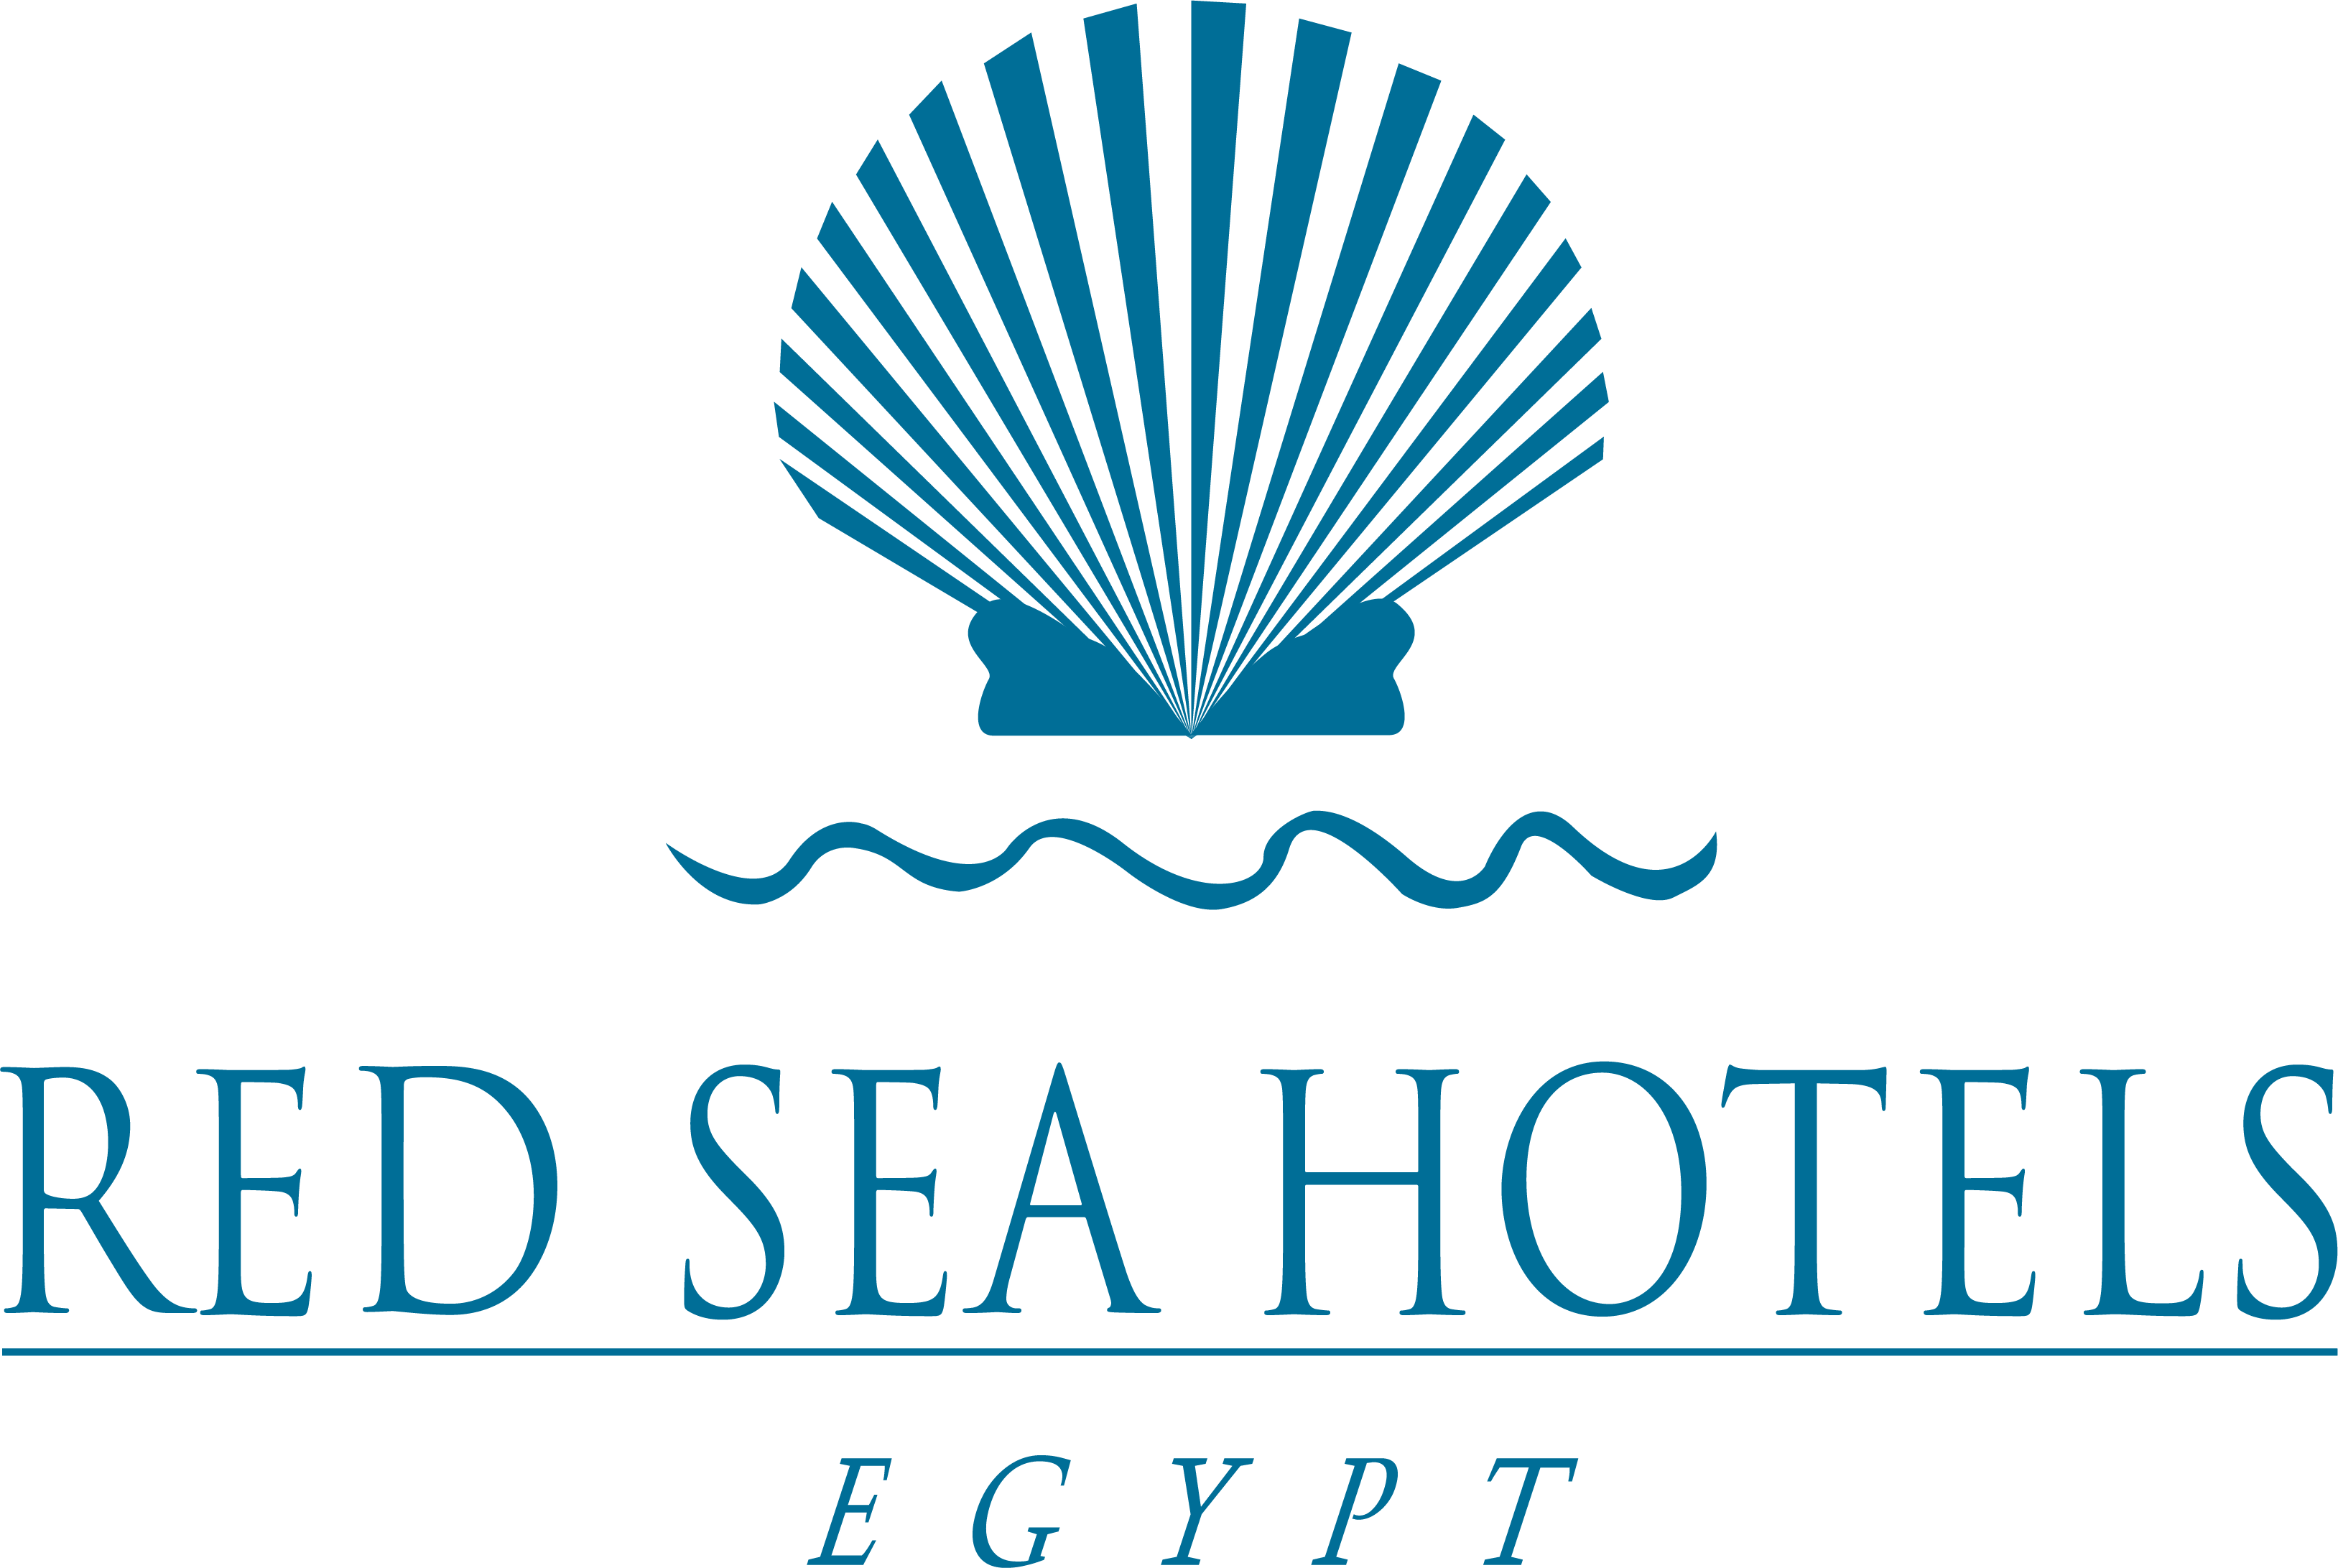 Redseahotels